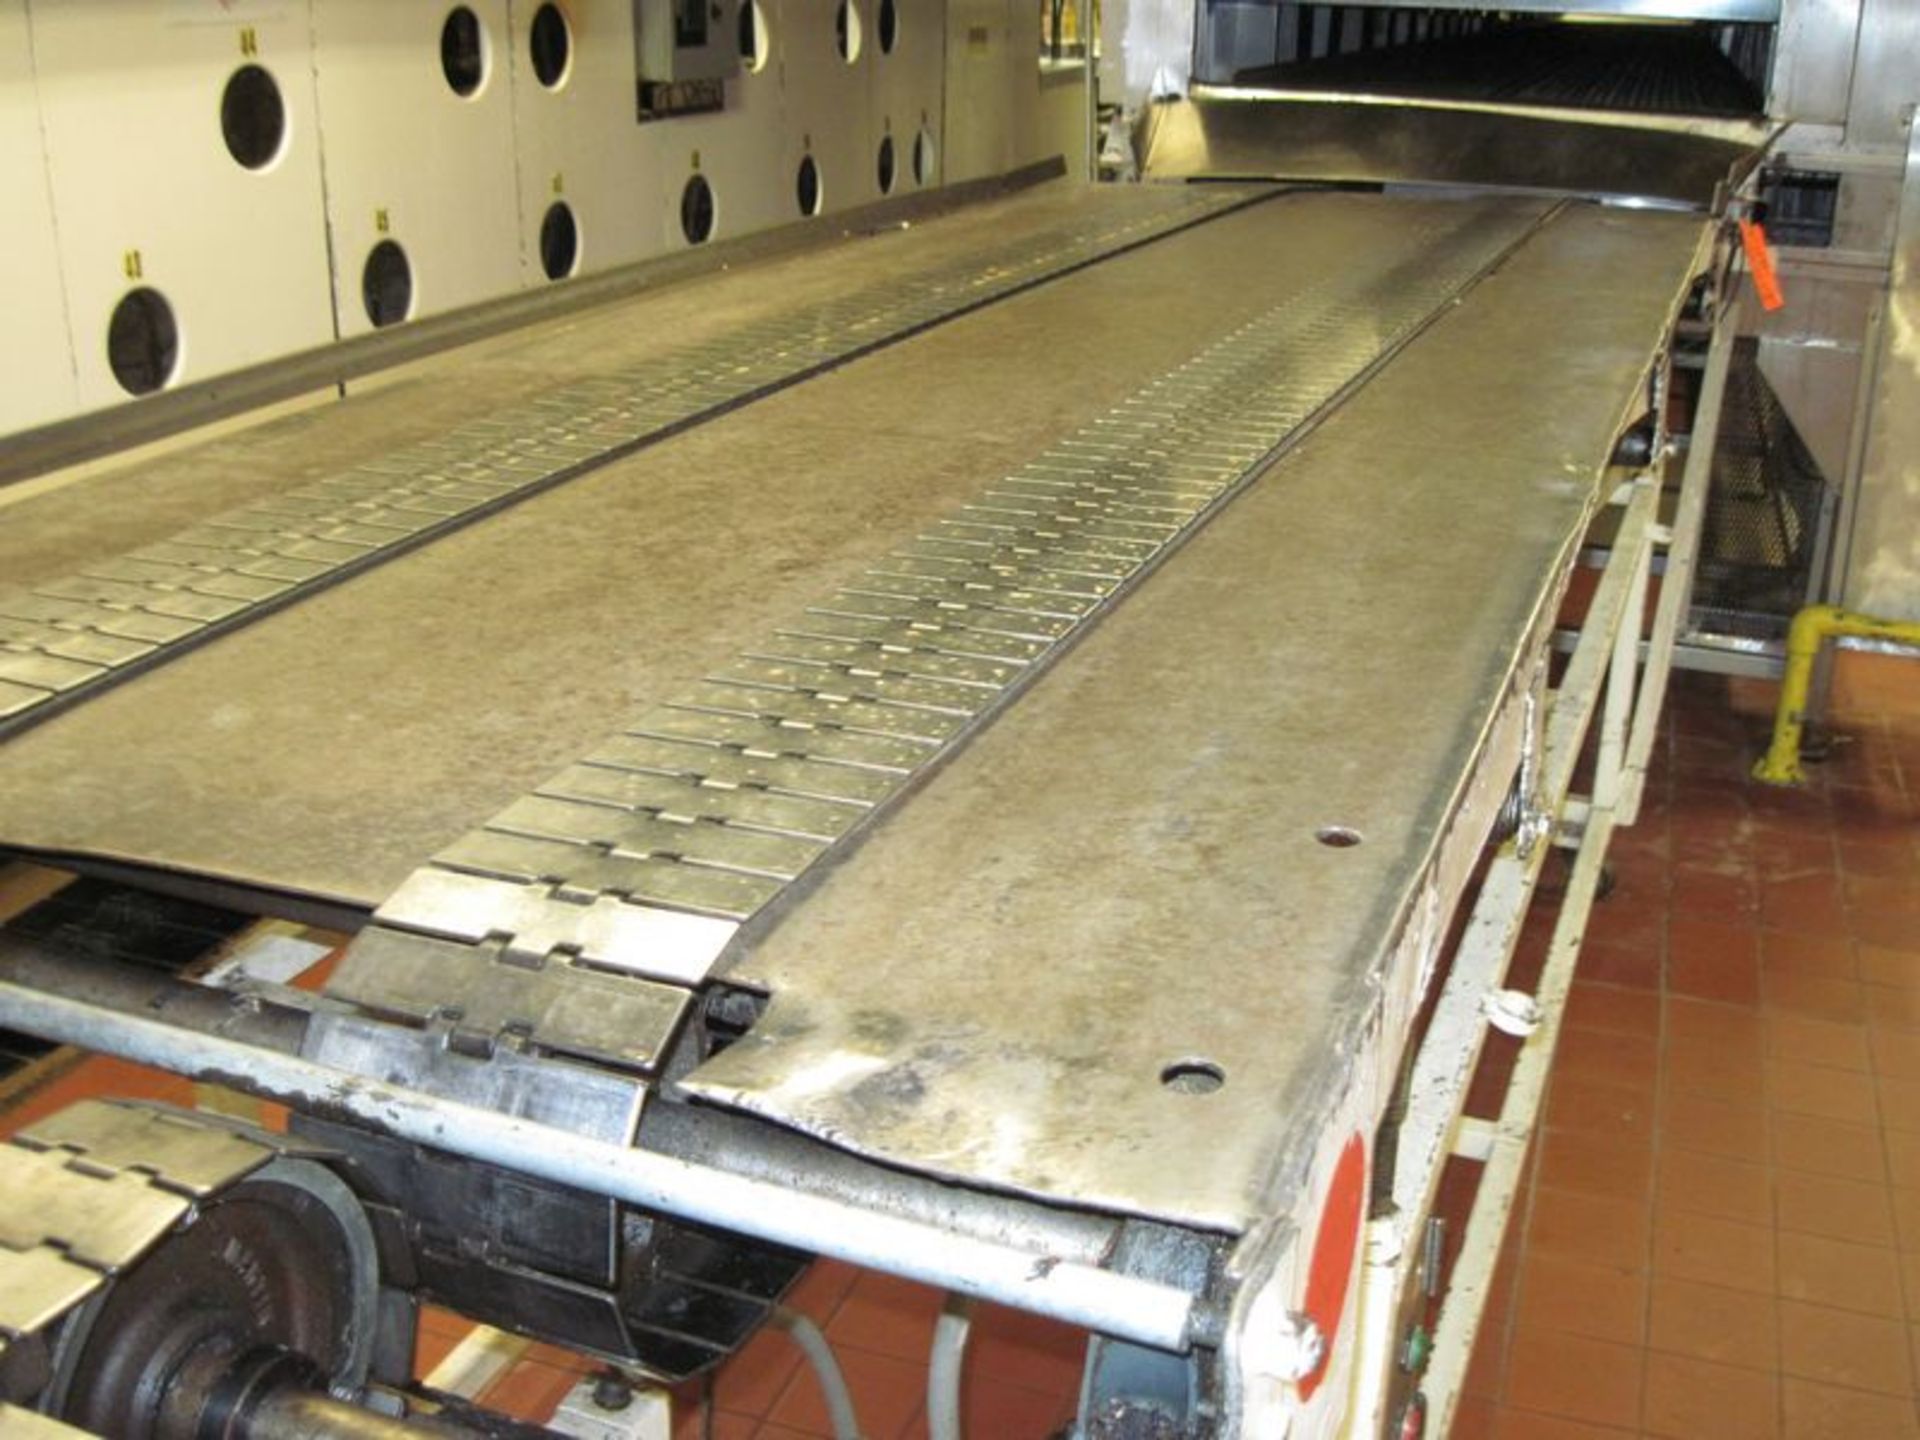 Dual metal table top belt conveyor. (2) Approximate 6" wide x 11' long belts. With approximate 1hp